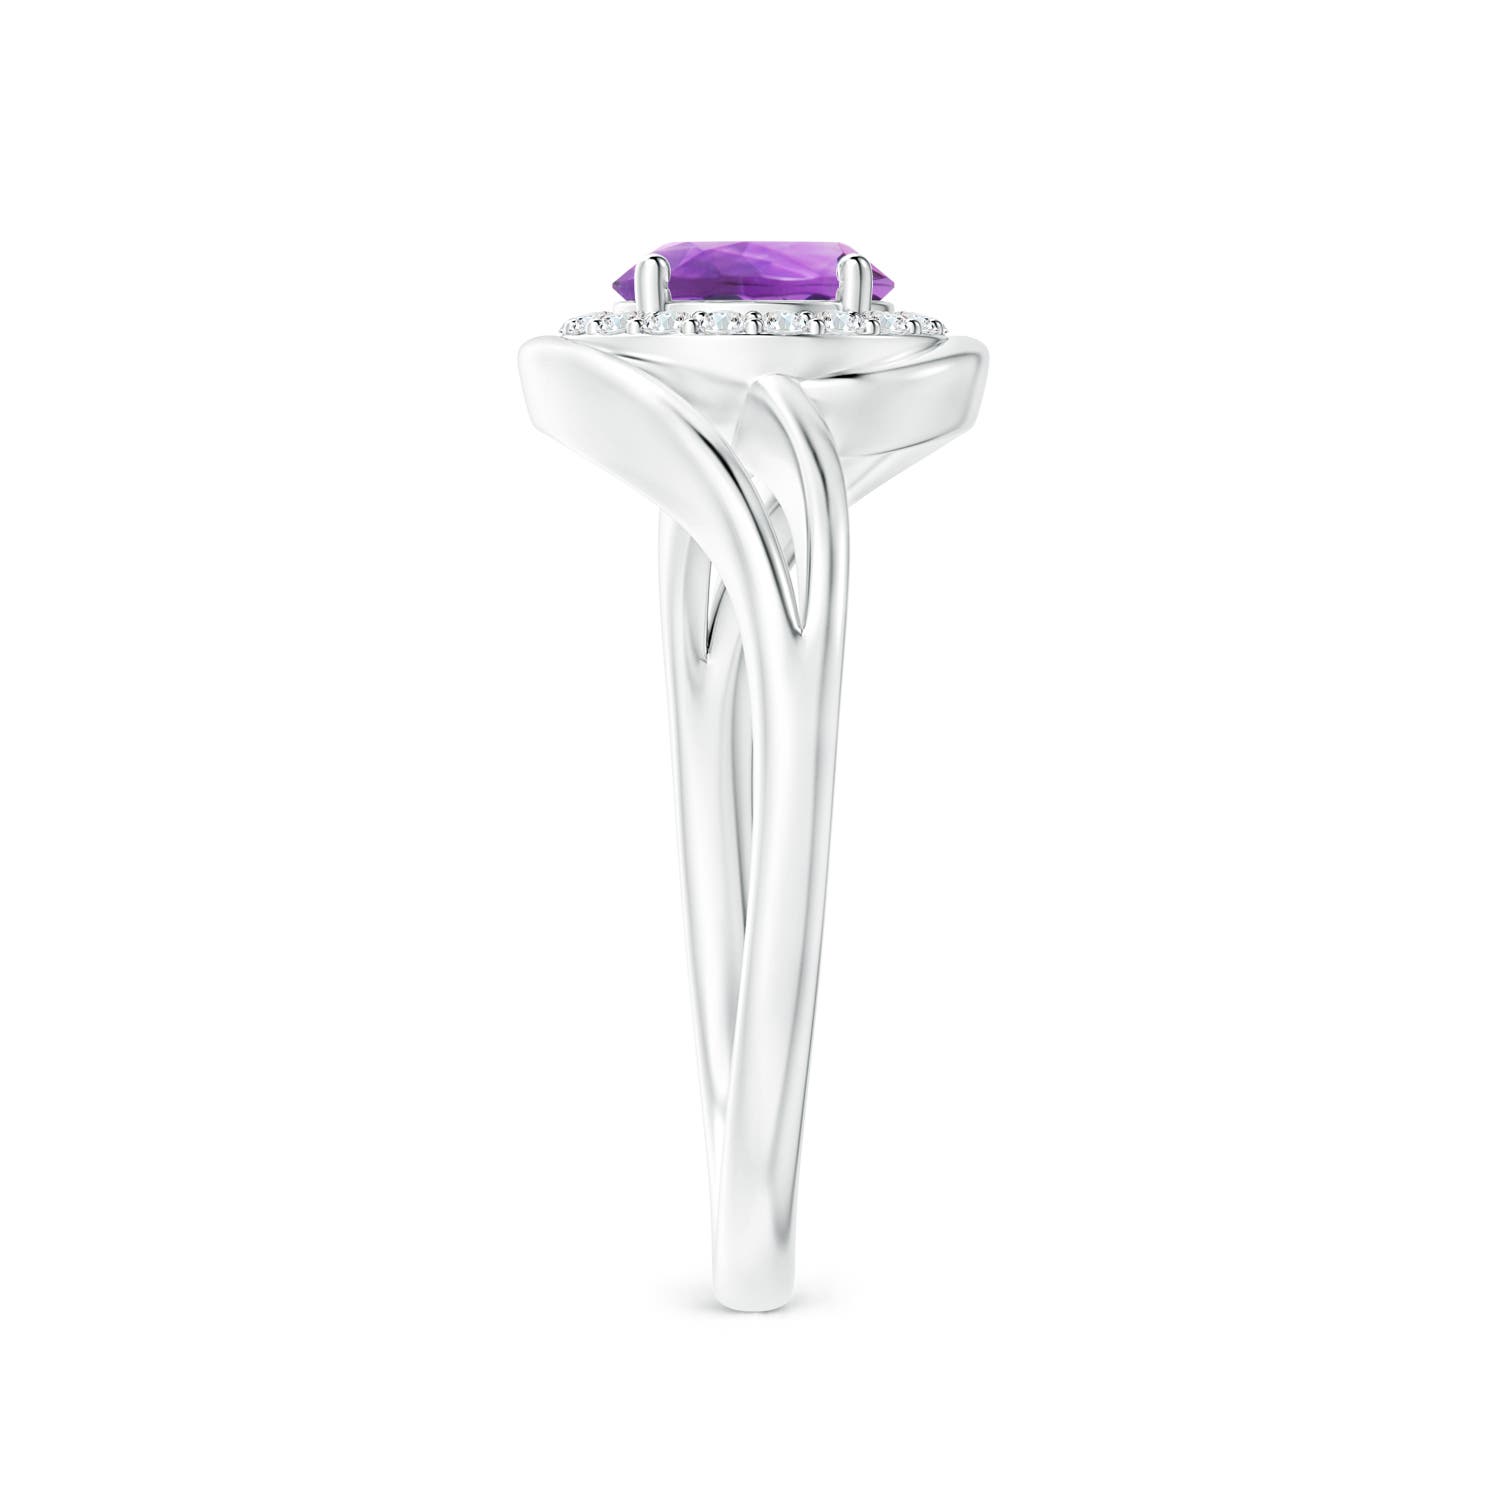 AA - Amethyst / 0.91 CT / 14 KT White Gold